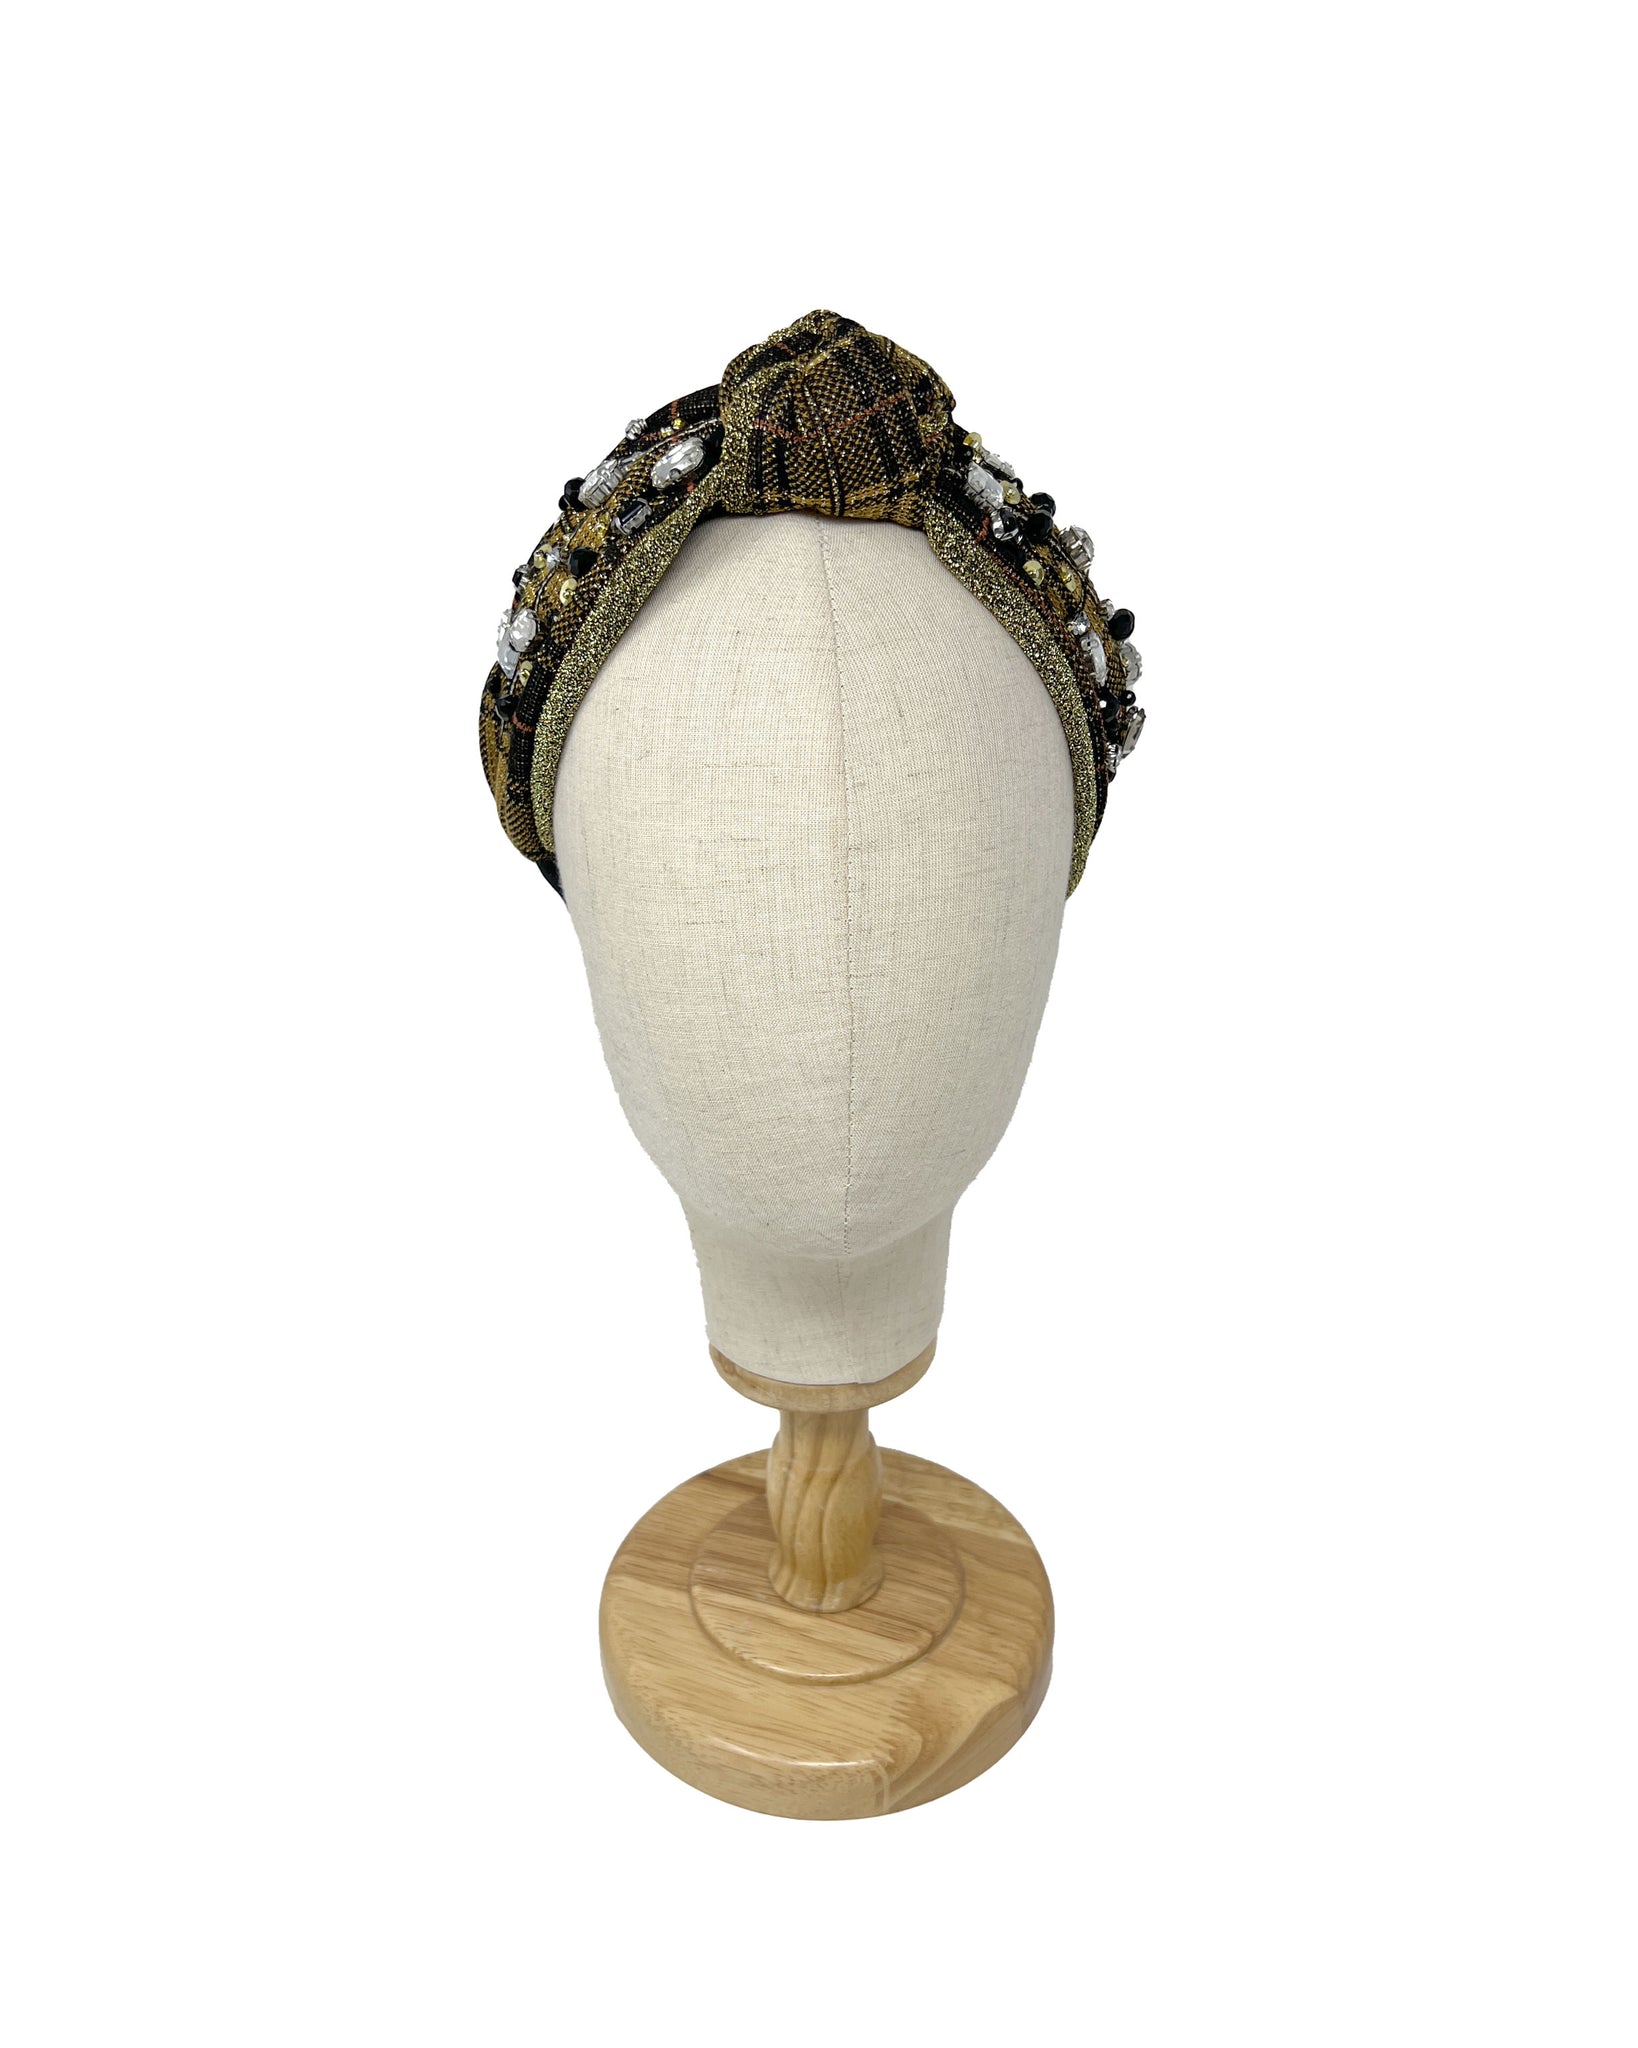 Golden lurex plaid jersey hairband with central knot